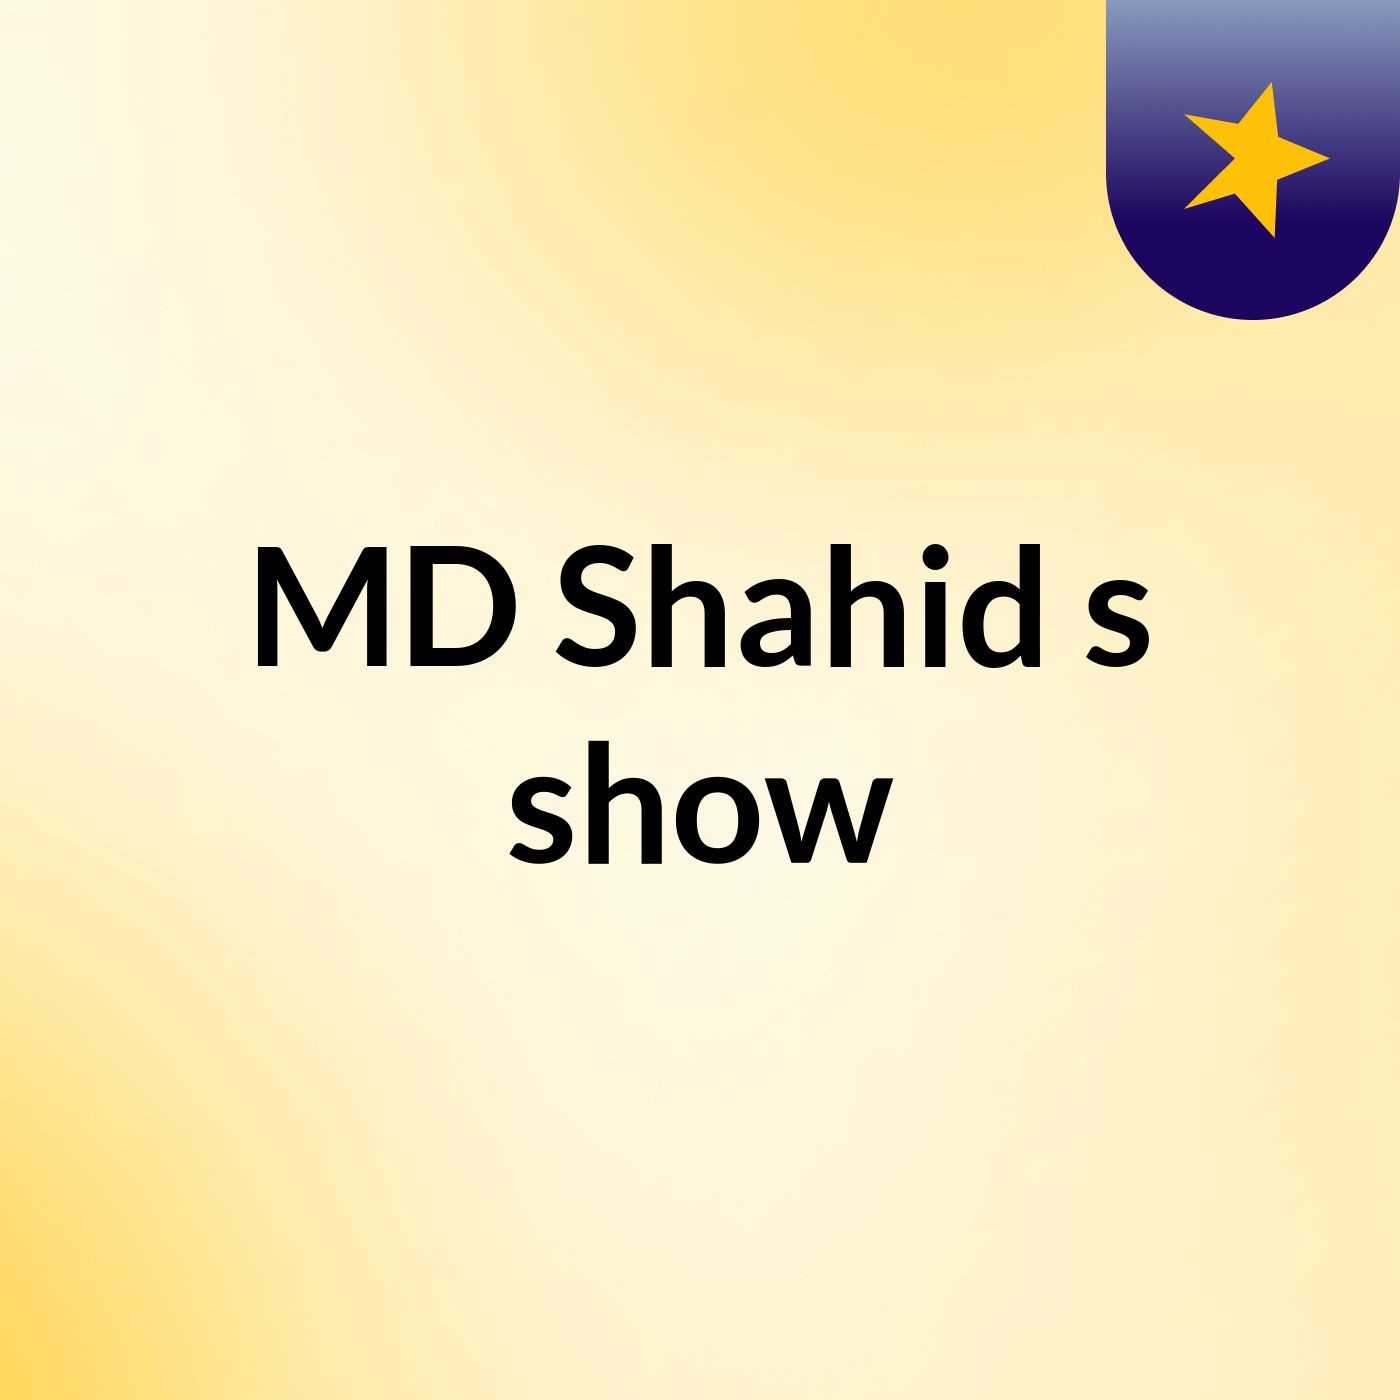 MD Shahid's show